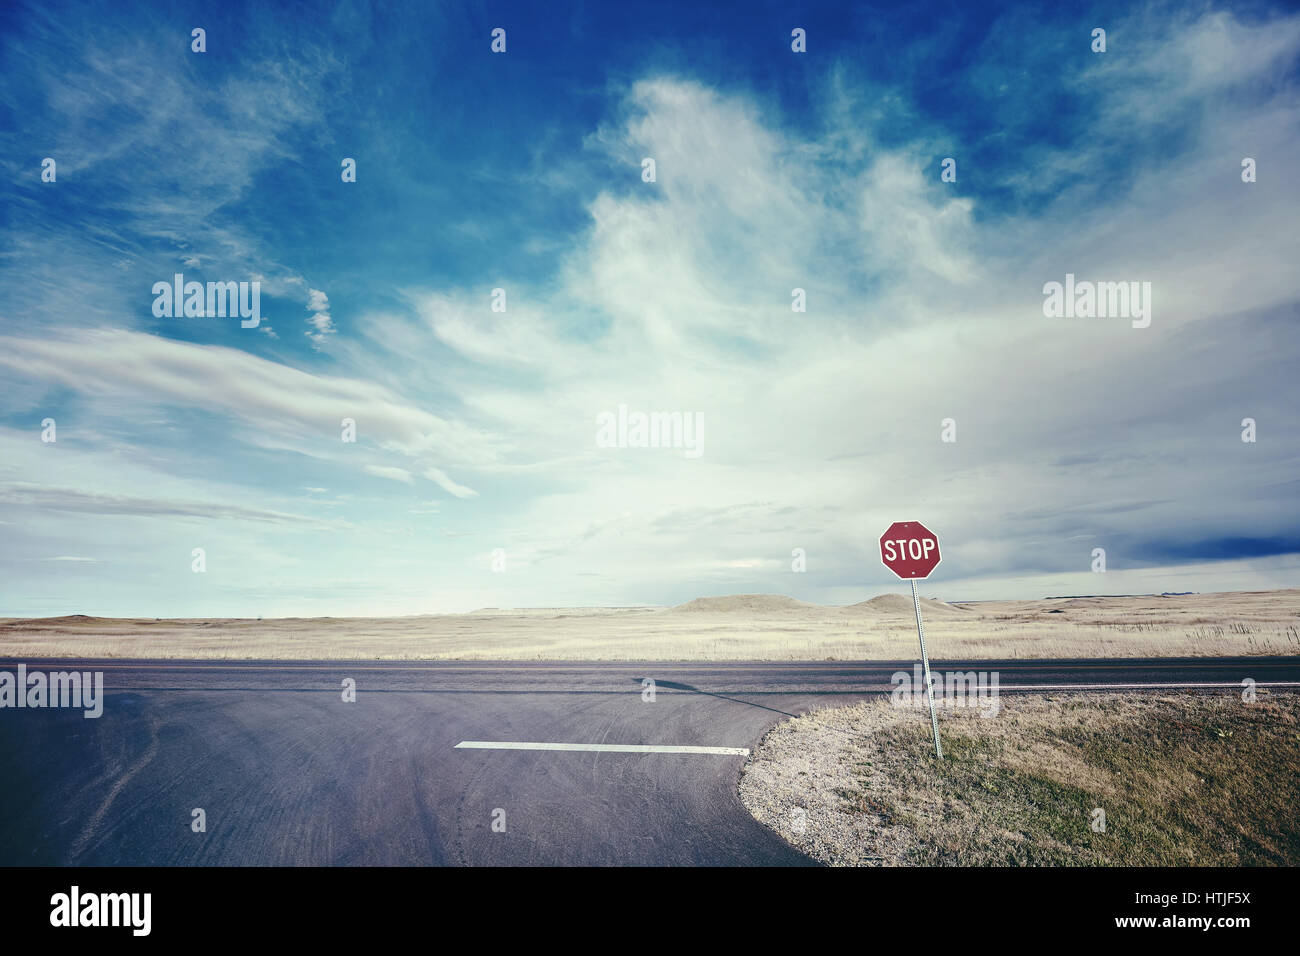 Retro stylized picture of a highway with a stop sign, USA. Stock Photo